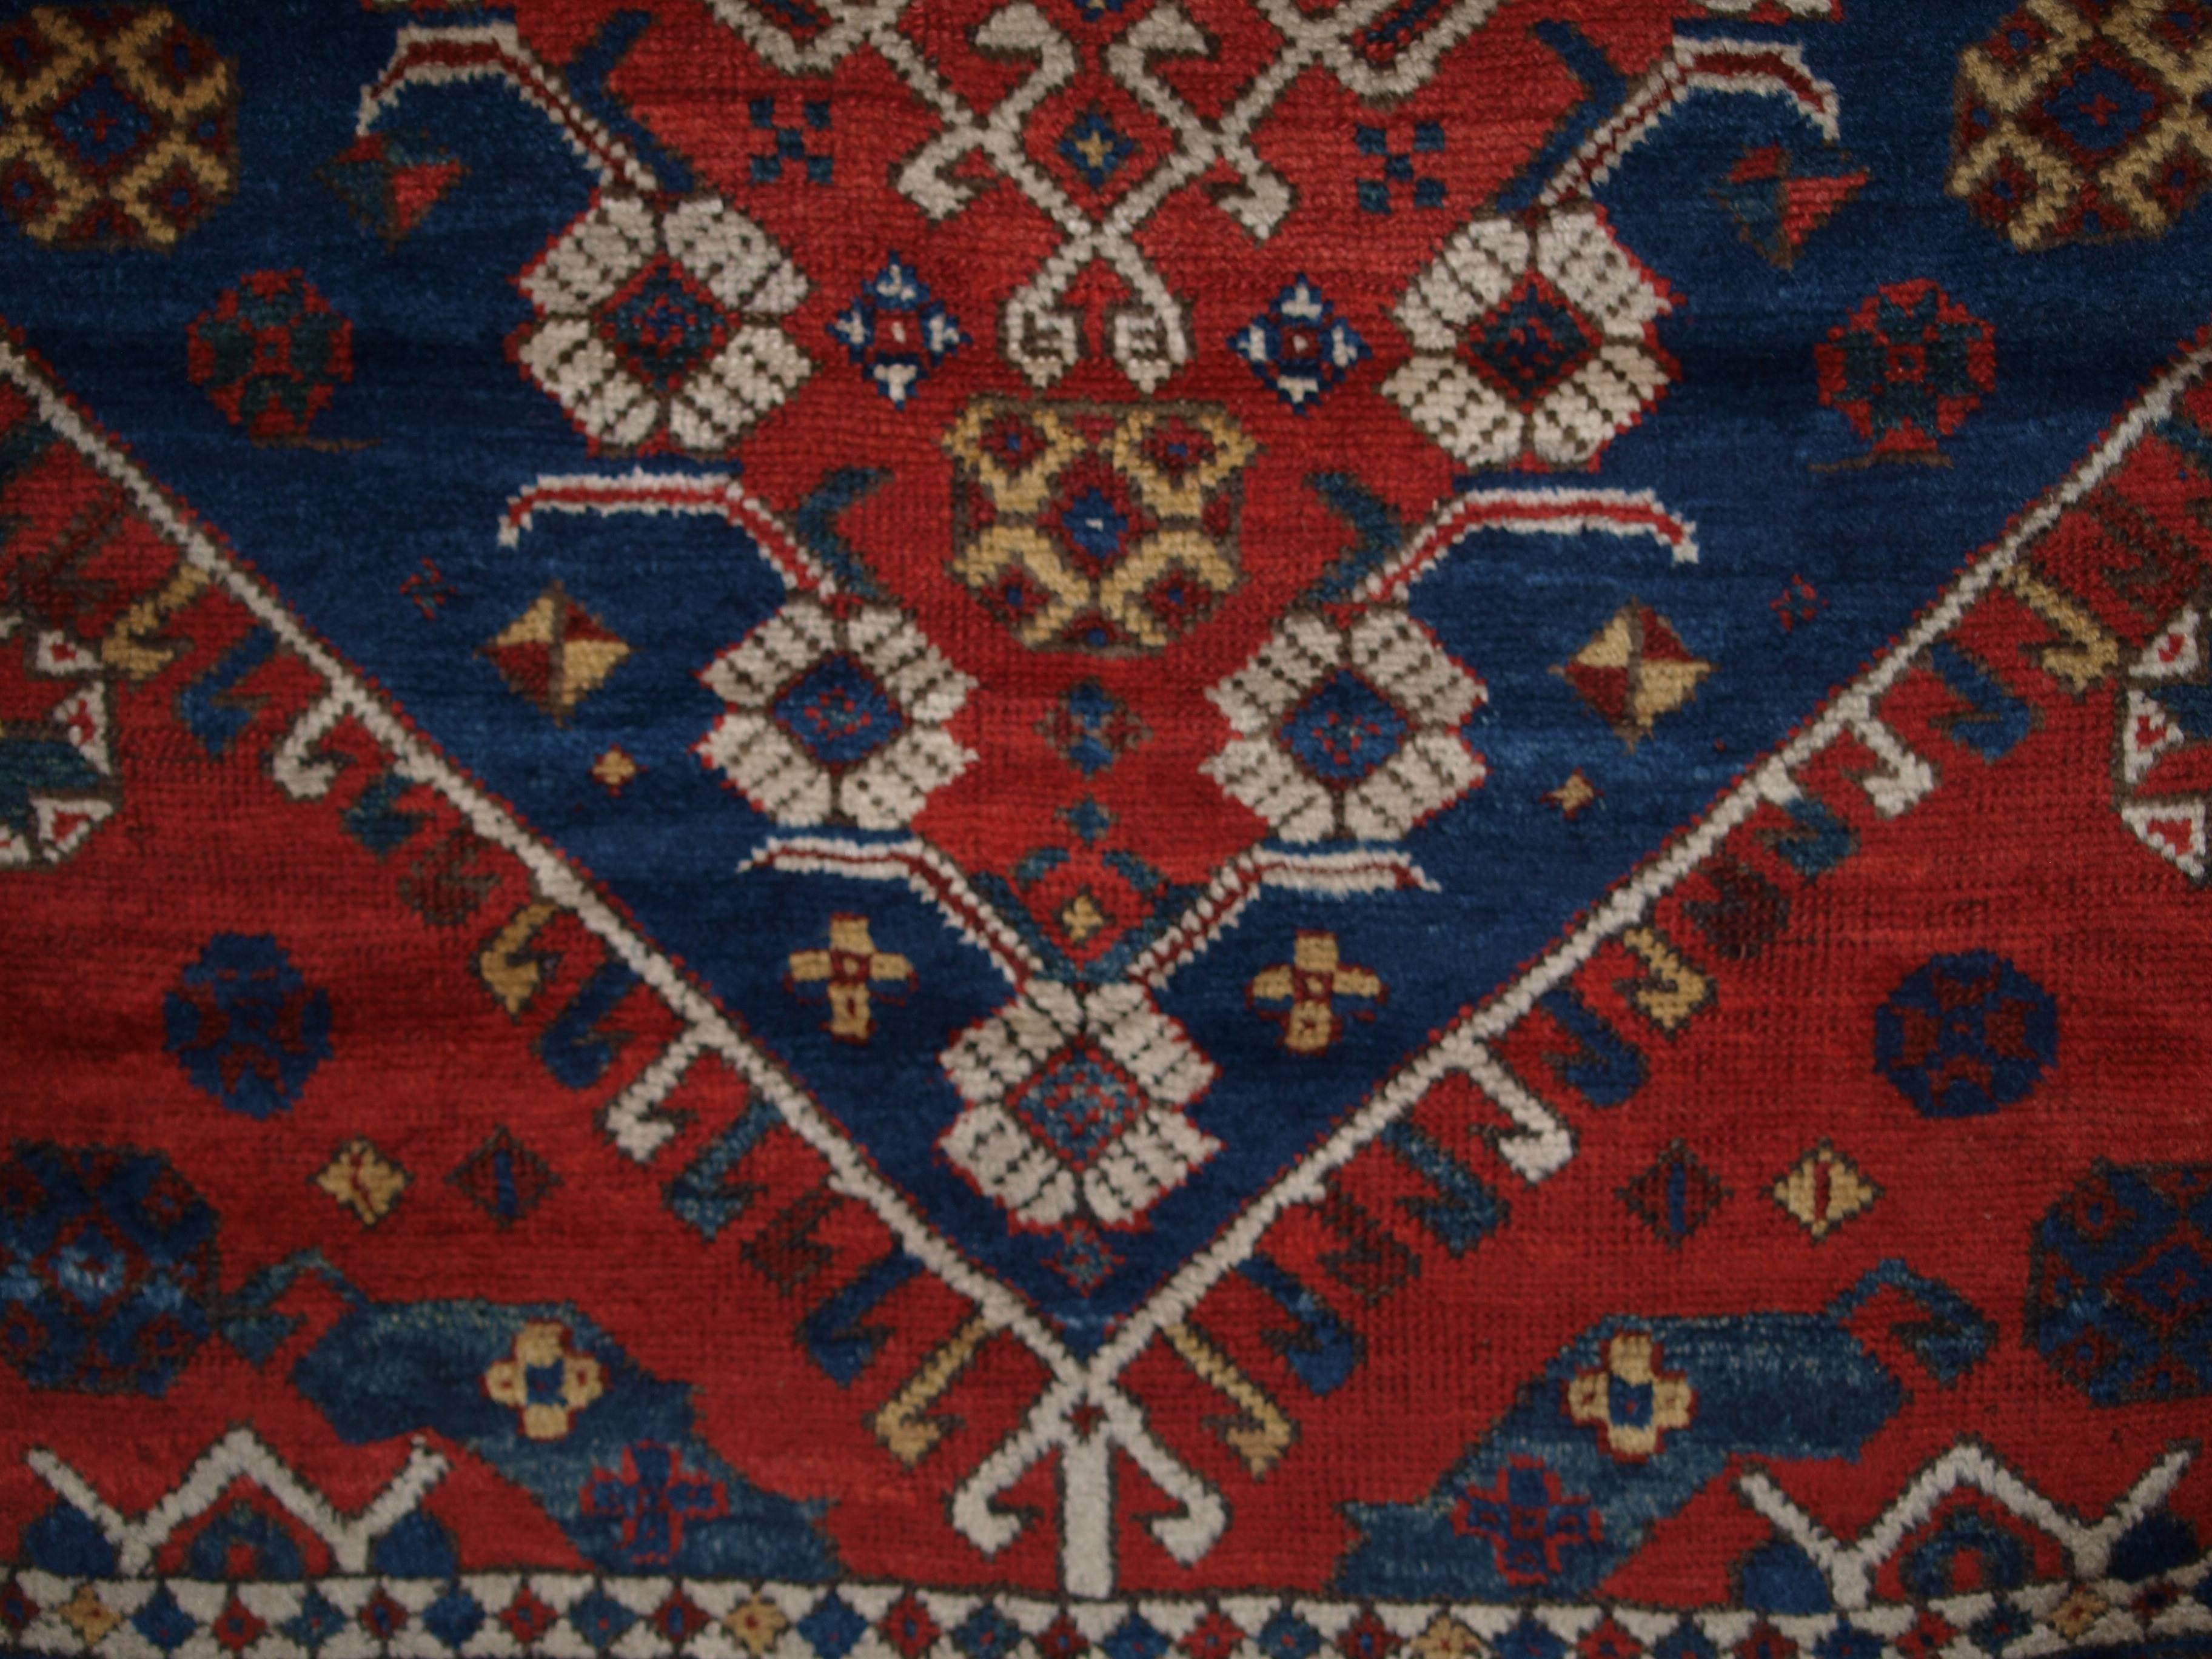 Measures: 6 ft 0 in x 4 ft 4 in (182 x 132cm).

Antique Turkish Bergama rug of classic design with superb color, 

circa 1880.

The rug has very soft wool and a very floppy handle. 

The rug retains original Kilim at both ends. 

The rug